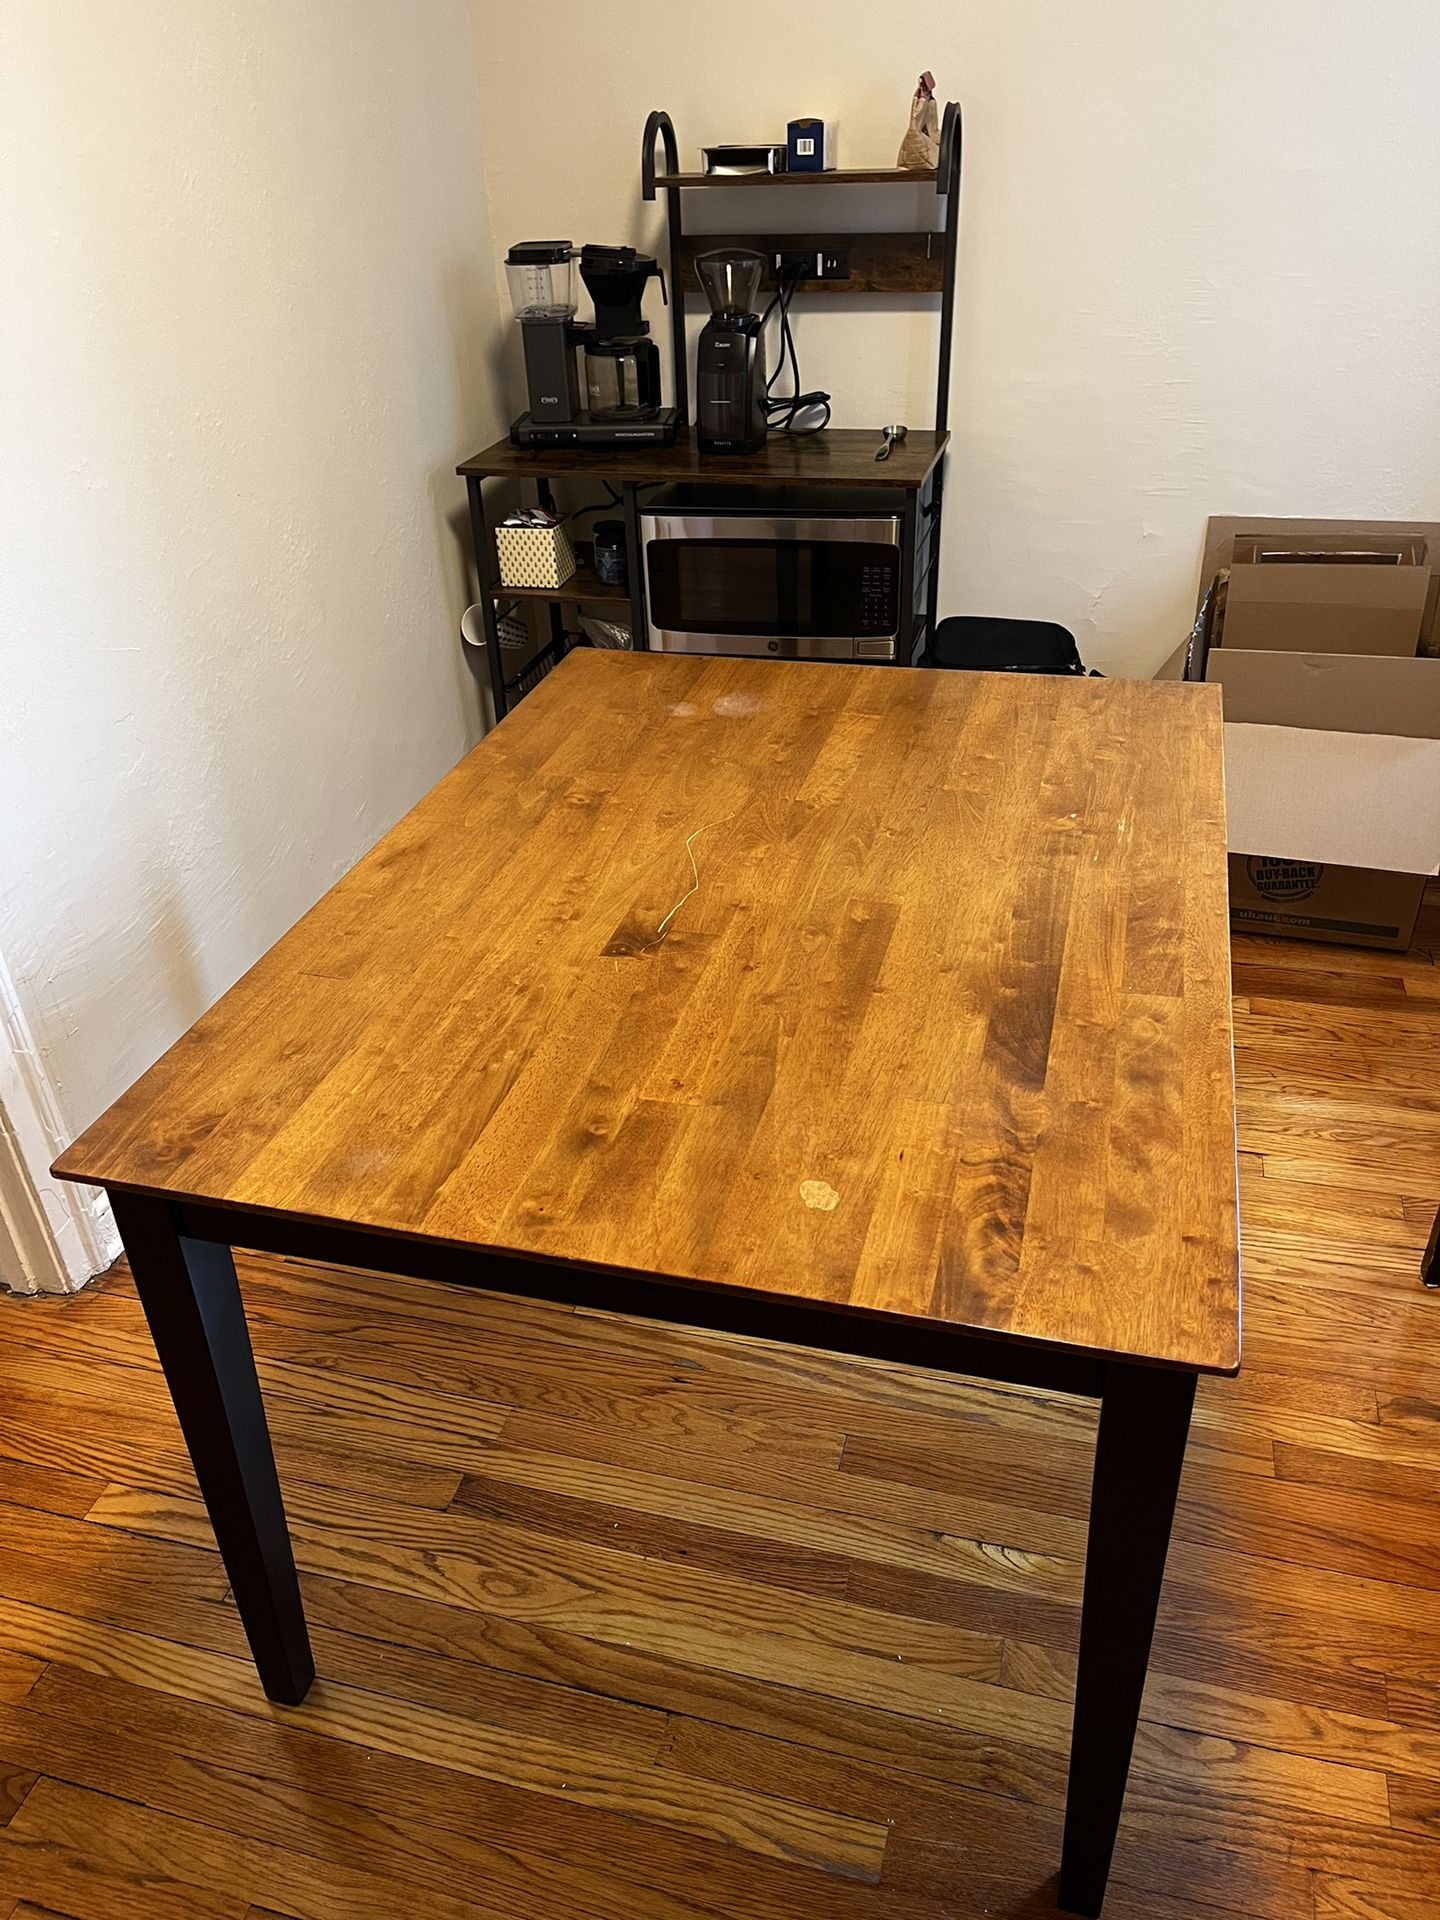 4’ x 3’ Wood Kitchen Table with Detachable Legs